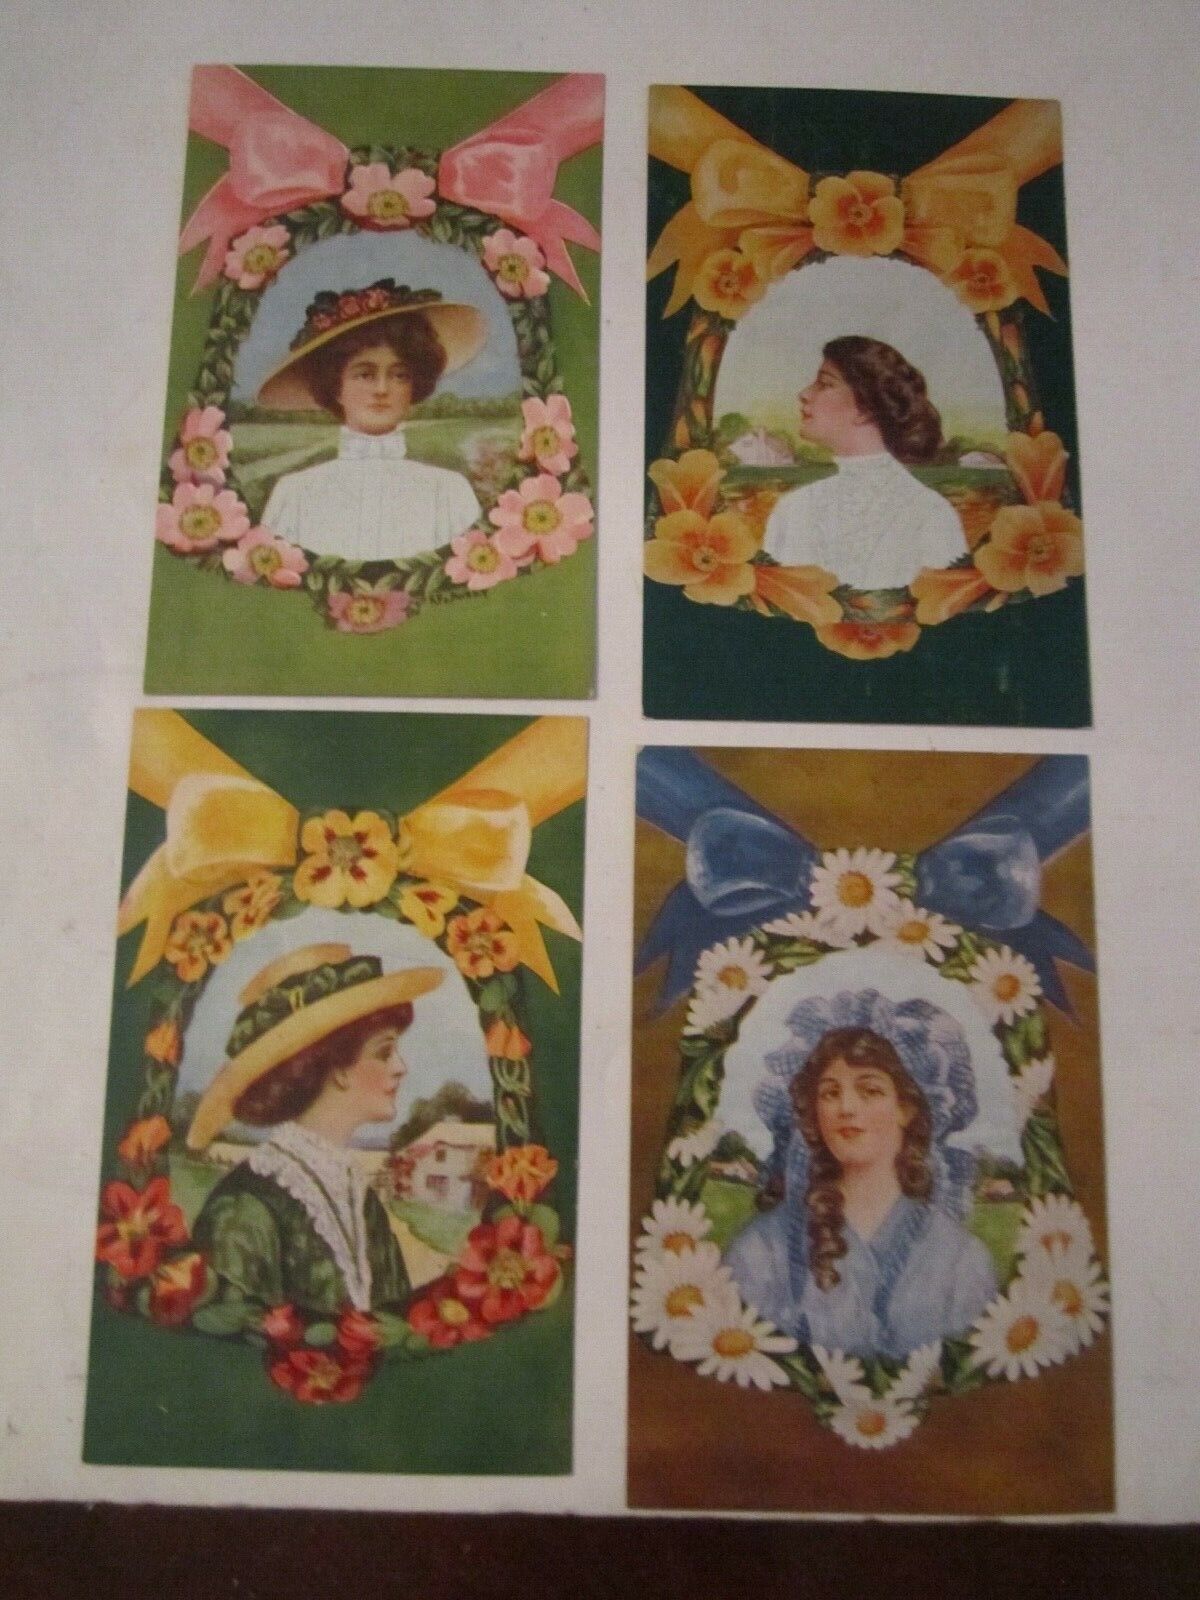 LOT OF 4 VINTAGE VICTORIAN LADY POSTCARDS - A132, A135, A133 & A141 - UNUSED - S